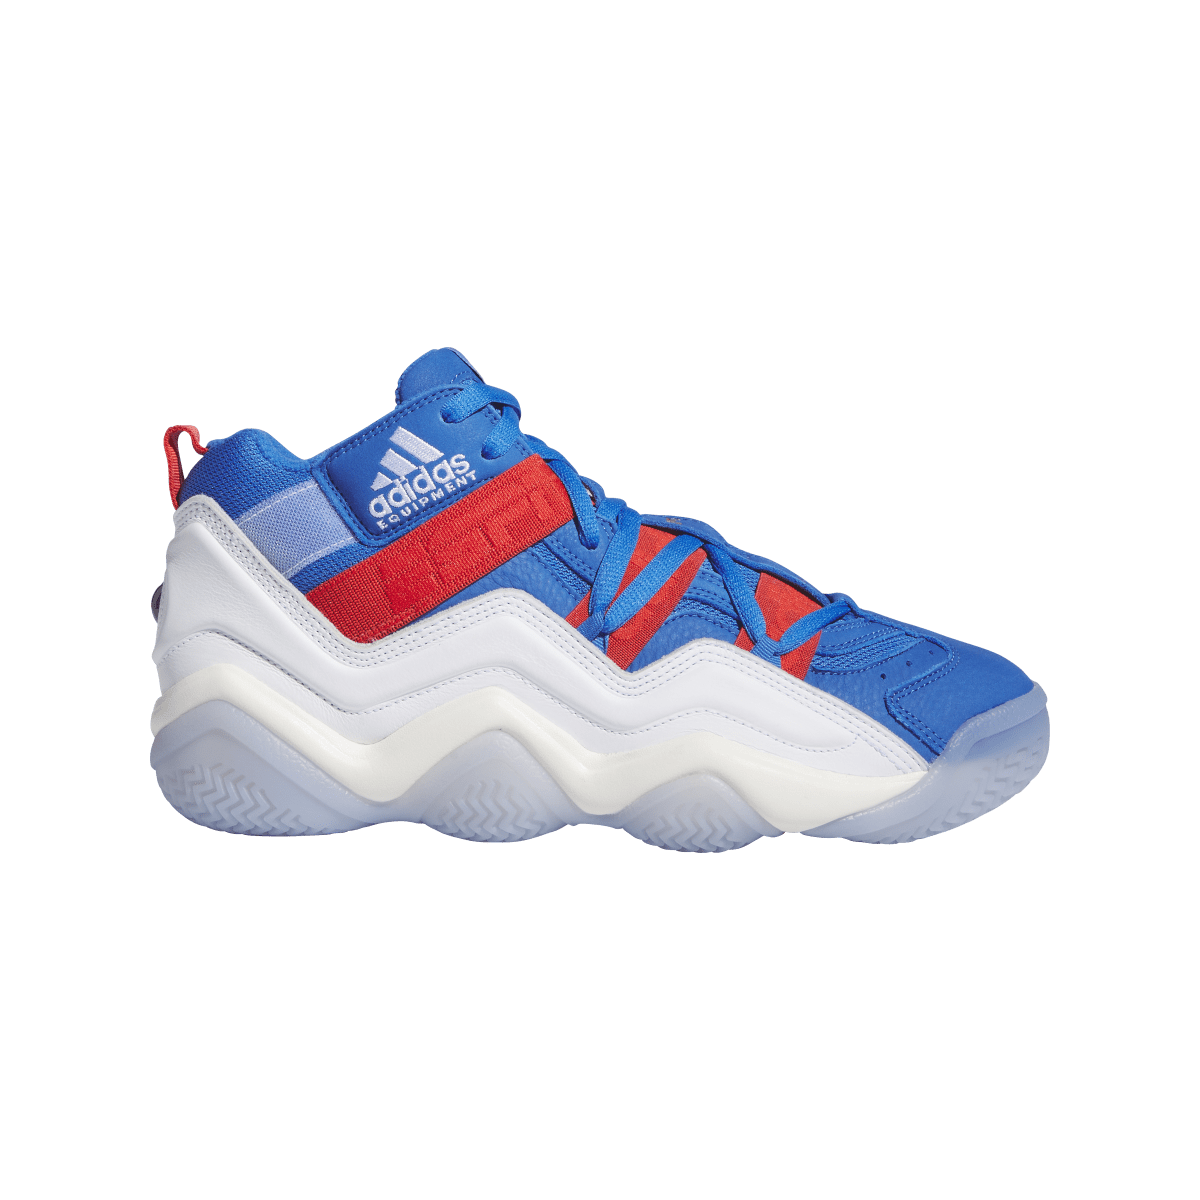 Access Shoes - Cyprus - 🌐 𝗦𝗛𝗢𝗣 𝗢𝗡𝗟𝗜𝗡𝗘 📲:https://access-shoes .com/product/sneakers-349/ 𝐏𝐑𝐈𝐂𝐄 𝟐𝟐€ ✨Shop and #WIN! With every  ONLINE purchase 🛒🎁🎊 𝐄𝐚𝐫𝐧 𝟓𝐱 𝐑𝐞𝐰𝐚𝐫𝐝 𝐩𝐨𝐢𝐧𝐭𝐬 𝐰𝐢𝐭𝐡  𝐞𝐯𝐞𝐫𝐲 𝐩𝐮𝐫𝐜𝐡𝐚𝐬𝐞 ...